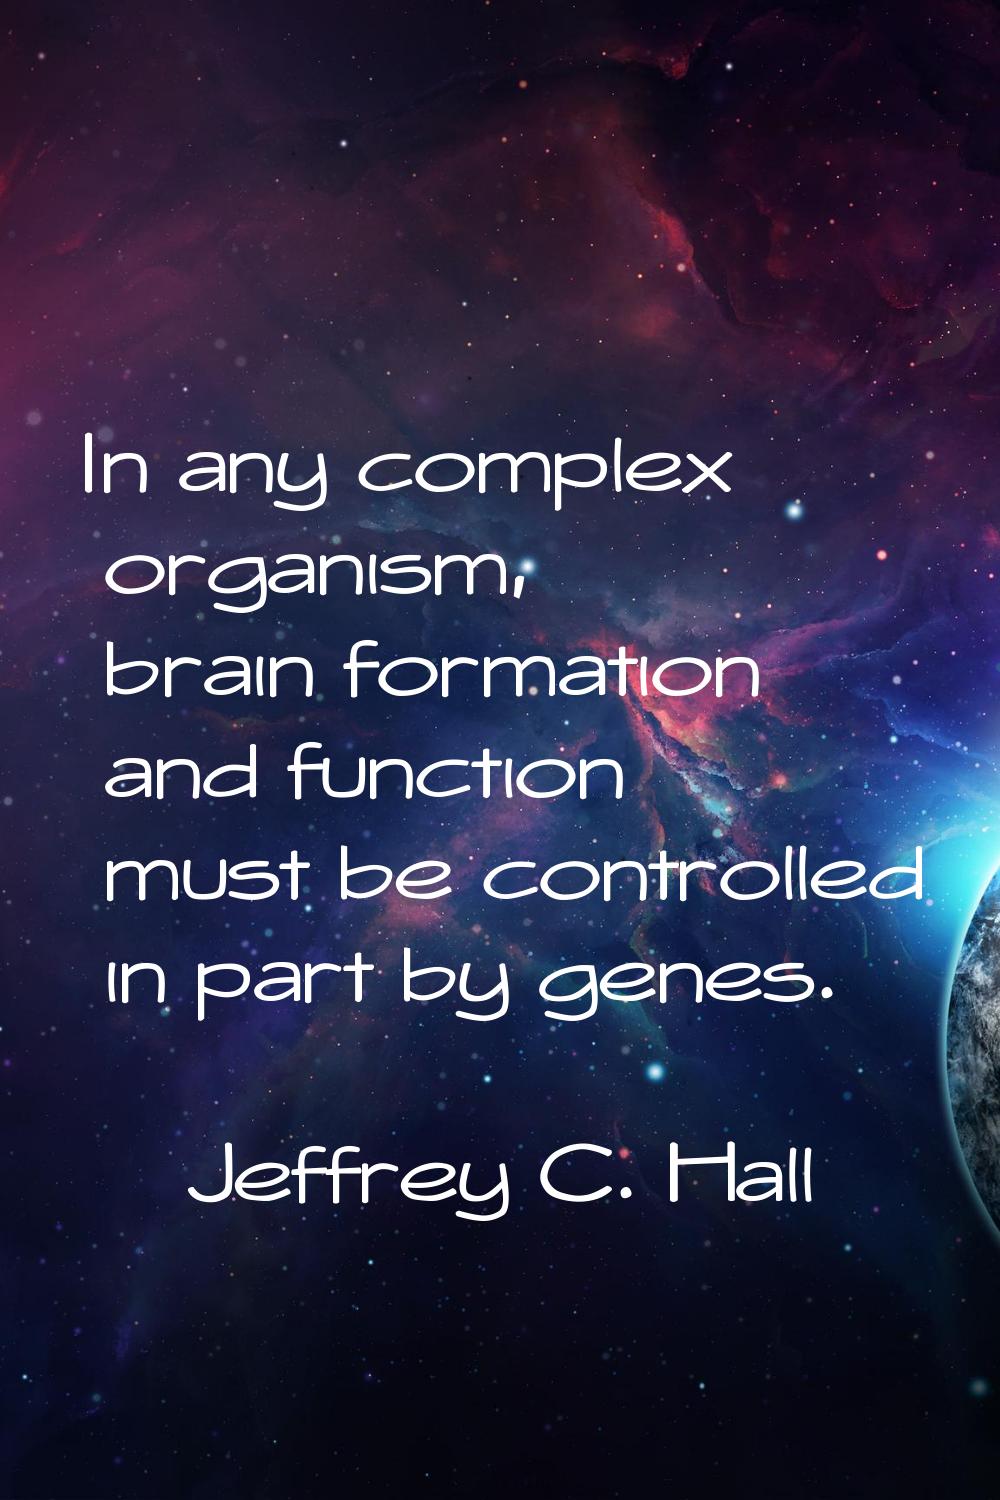 In any complex organism, brain formation and function must be controlled in part by genes.